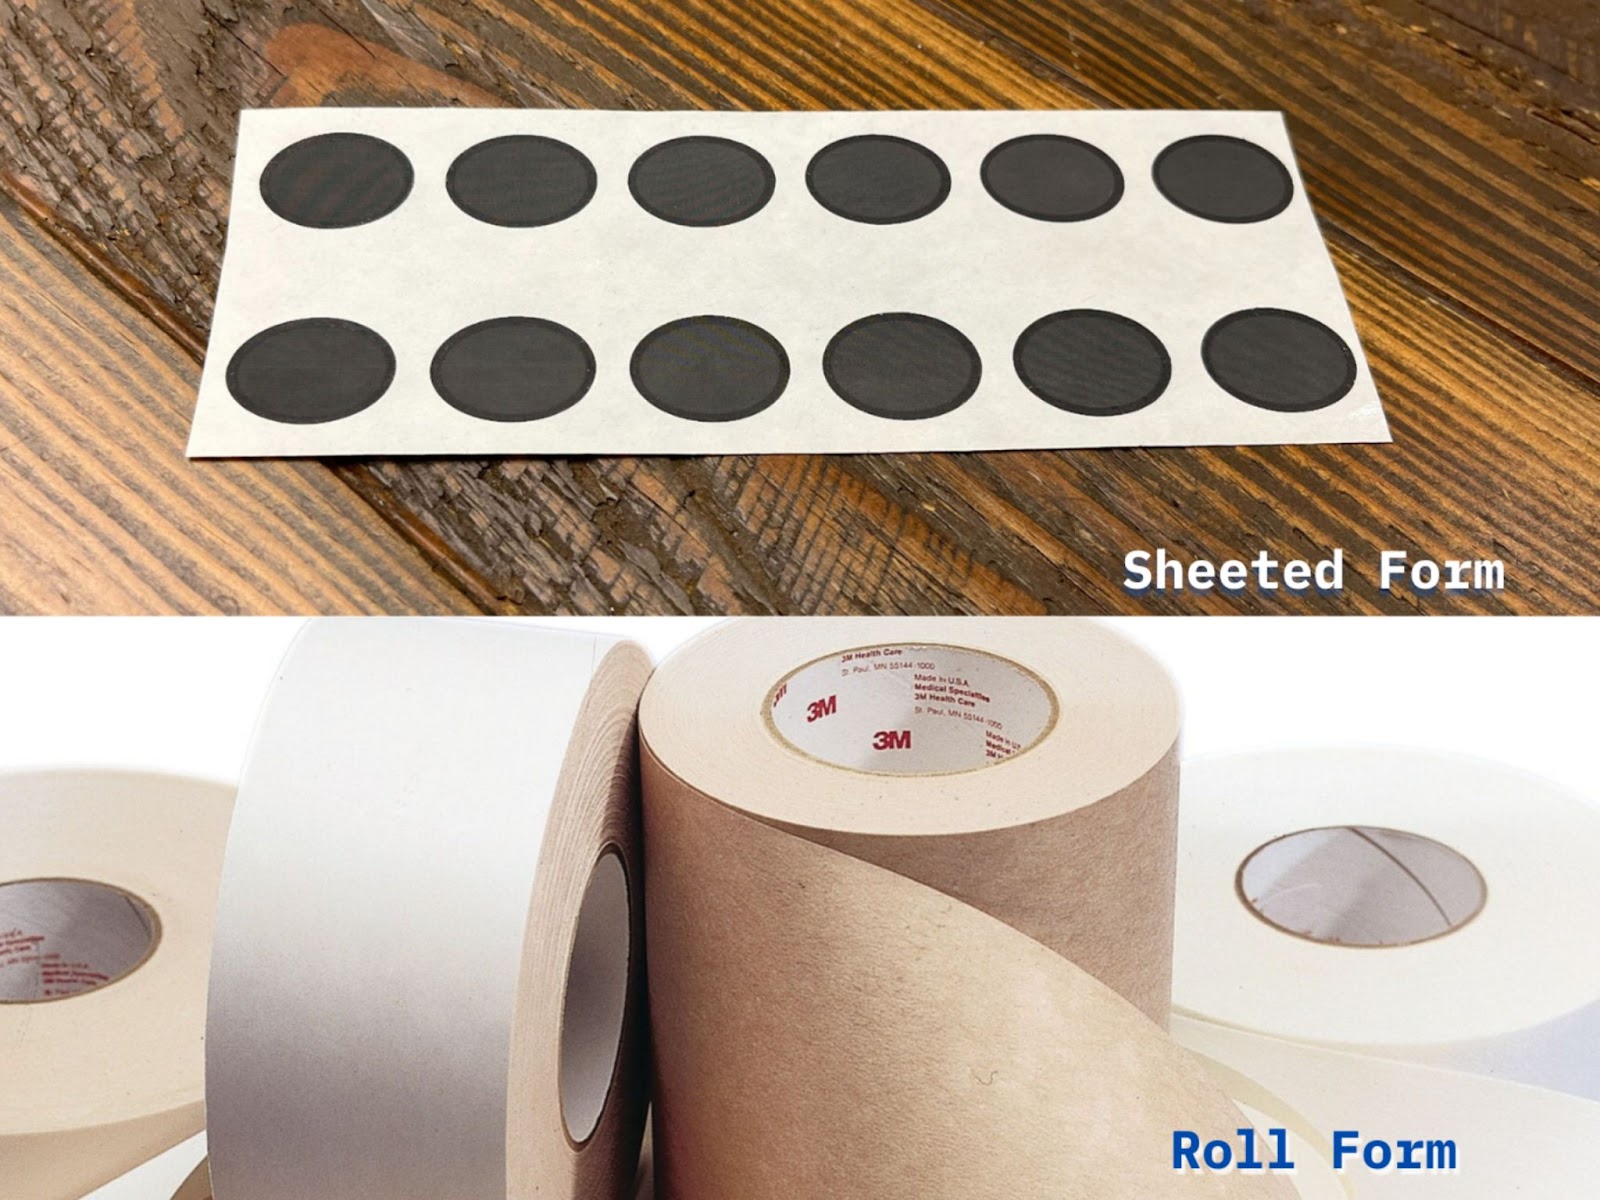 sheeted form of a custom tape part vs roll form